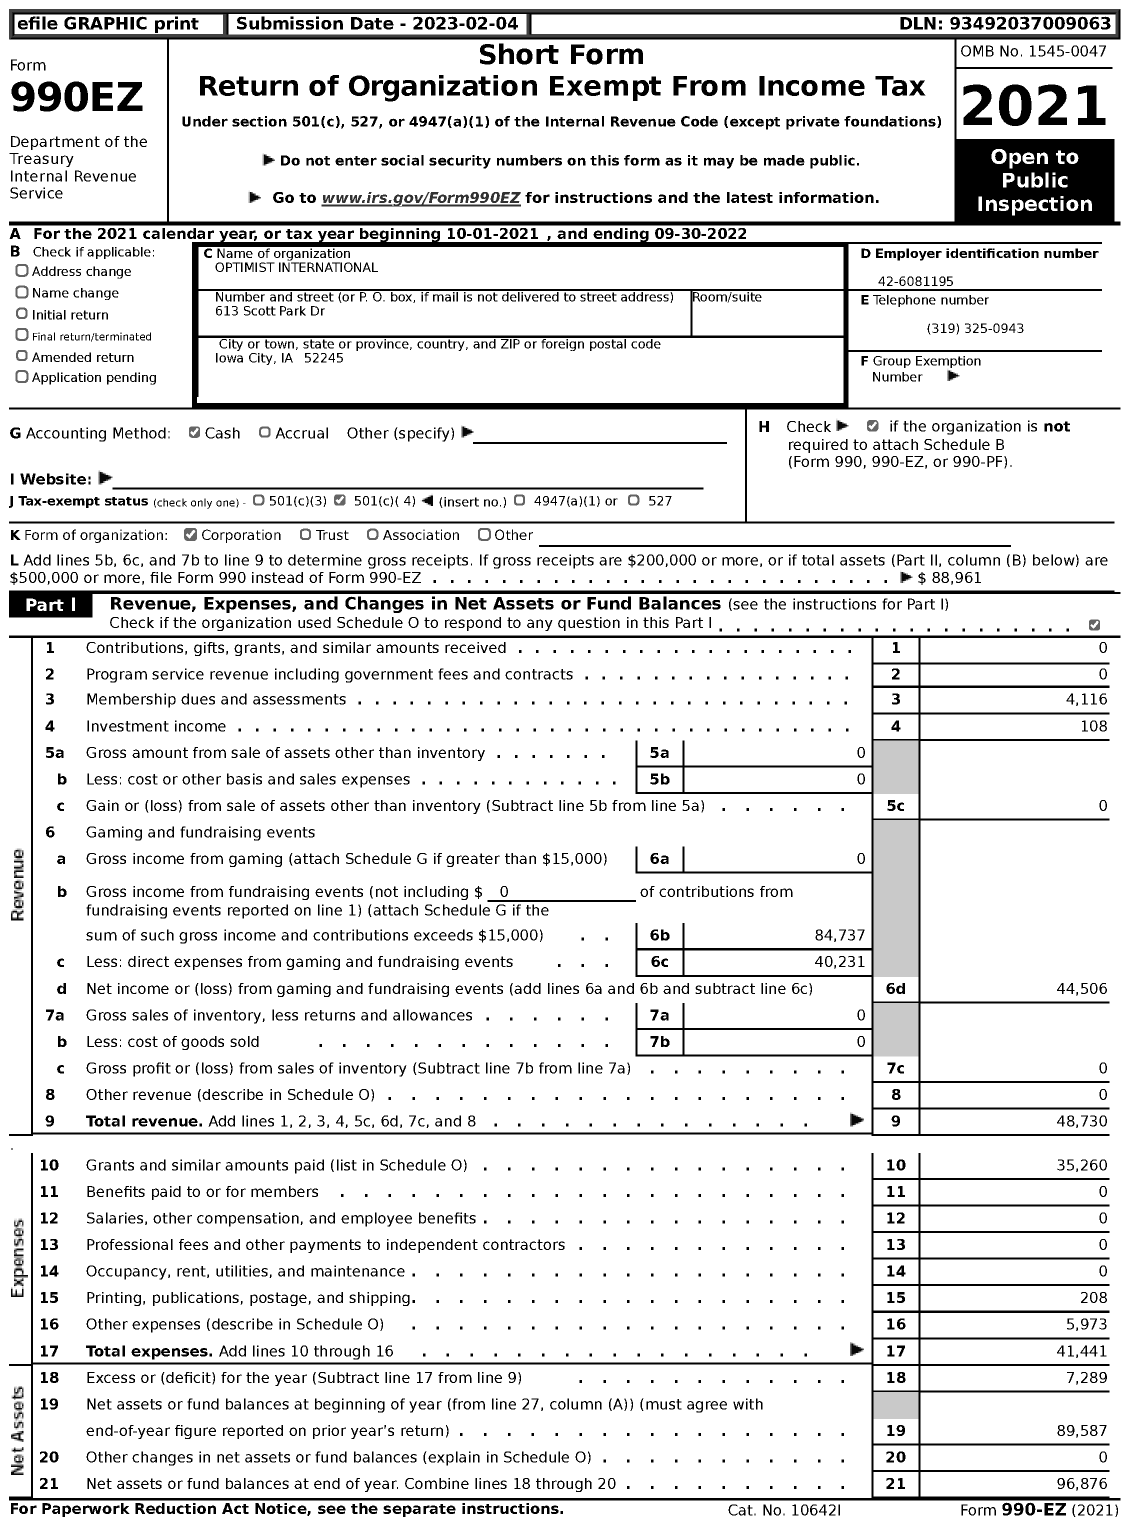 Image of first page of 2021 Form 990EZ for Optimist International - 40075 Oc of Iowa City Ia